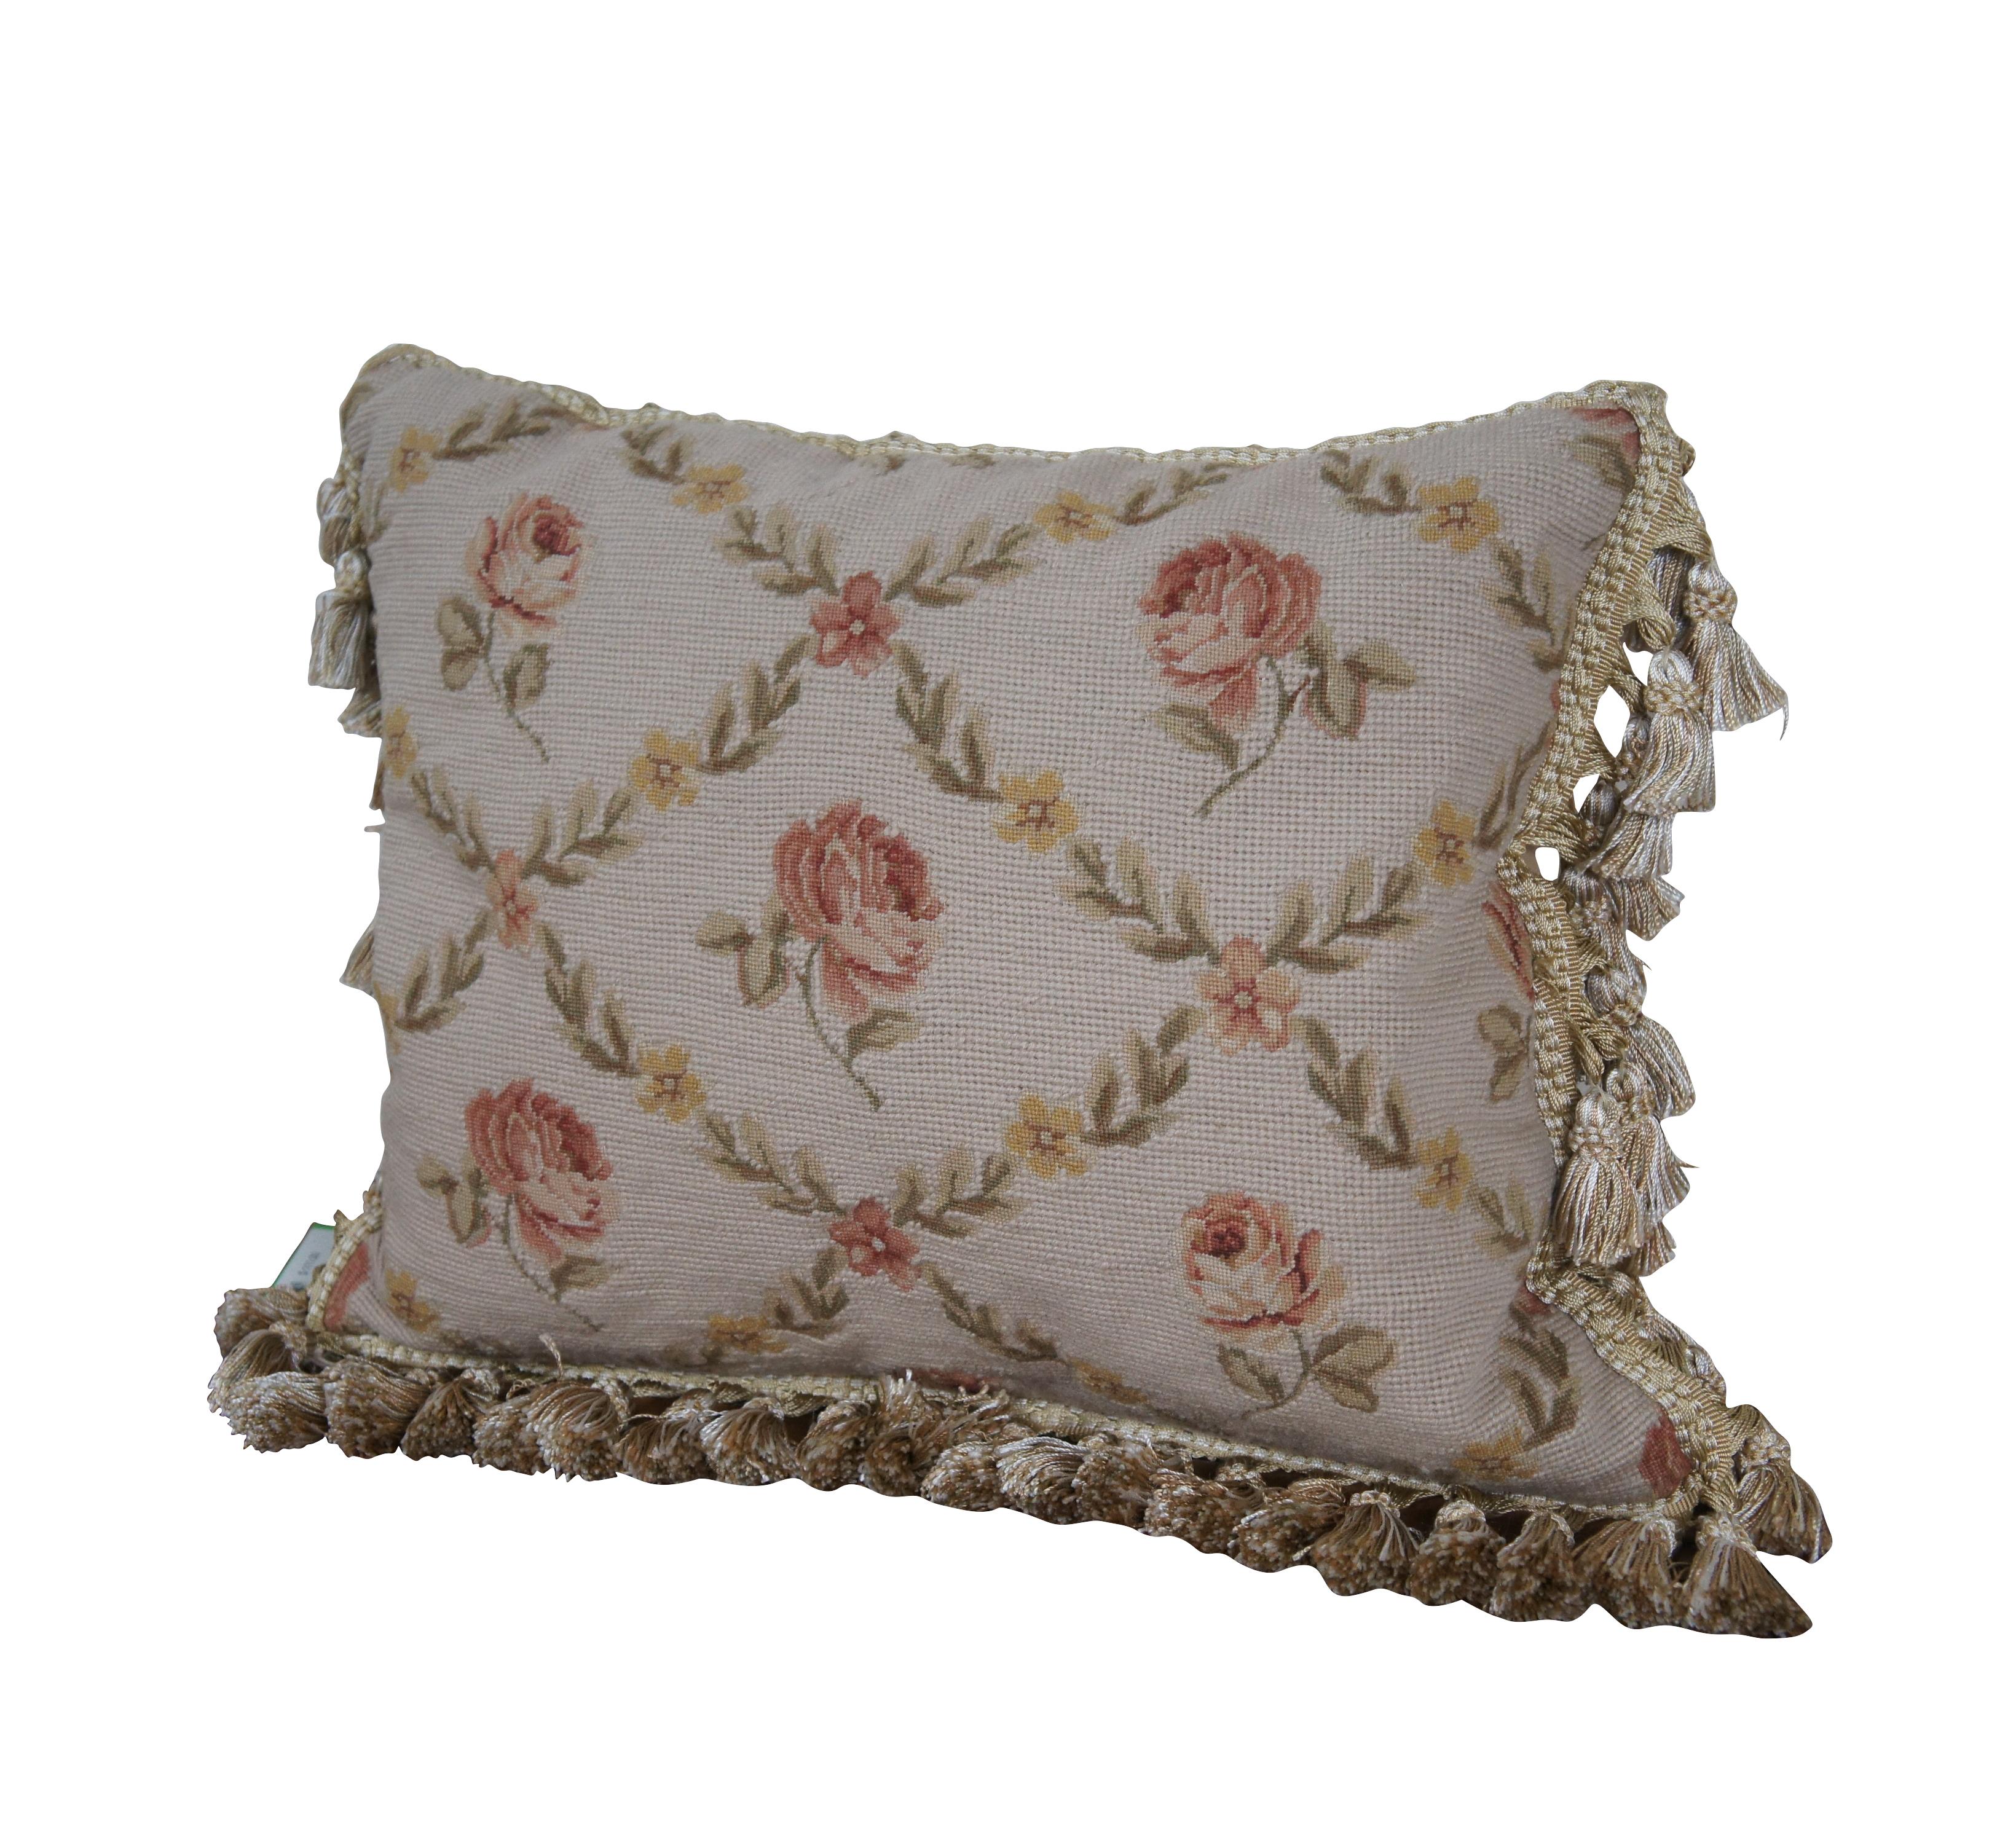 2 Available - 20th century square needlepoint throw pillow, hand embroidered with a pattern of pink roses, divided by criss crossing lines of pink and yellow flowers and leaves, on a beige background. Cream and gold tassel trim. Beige velour back